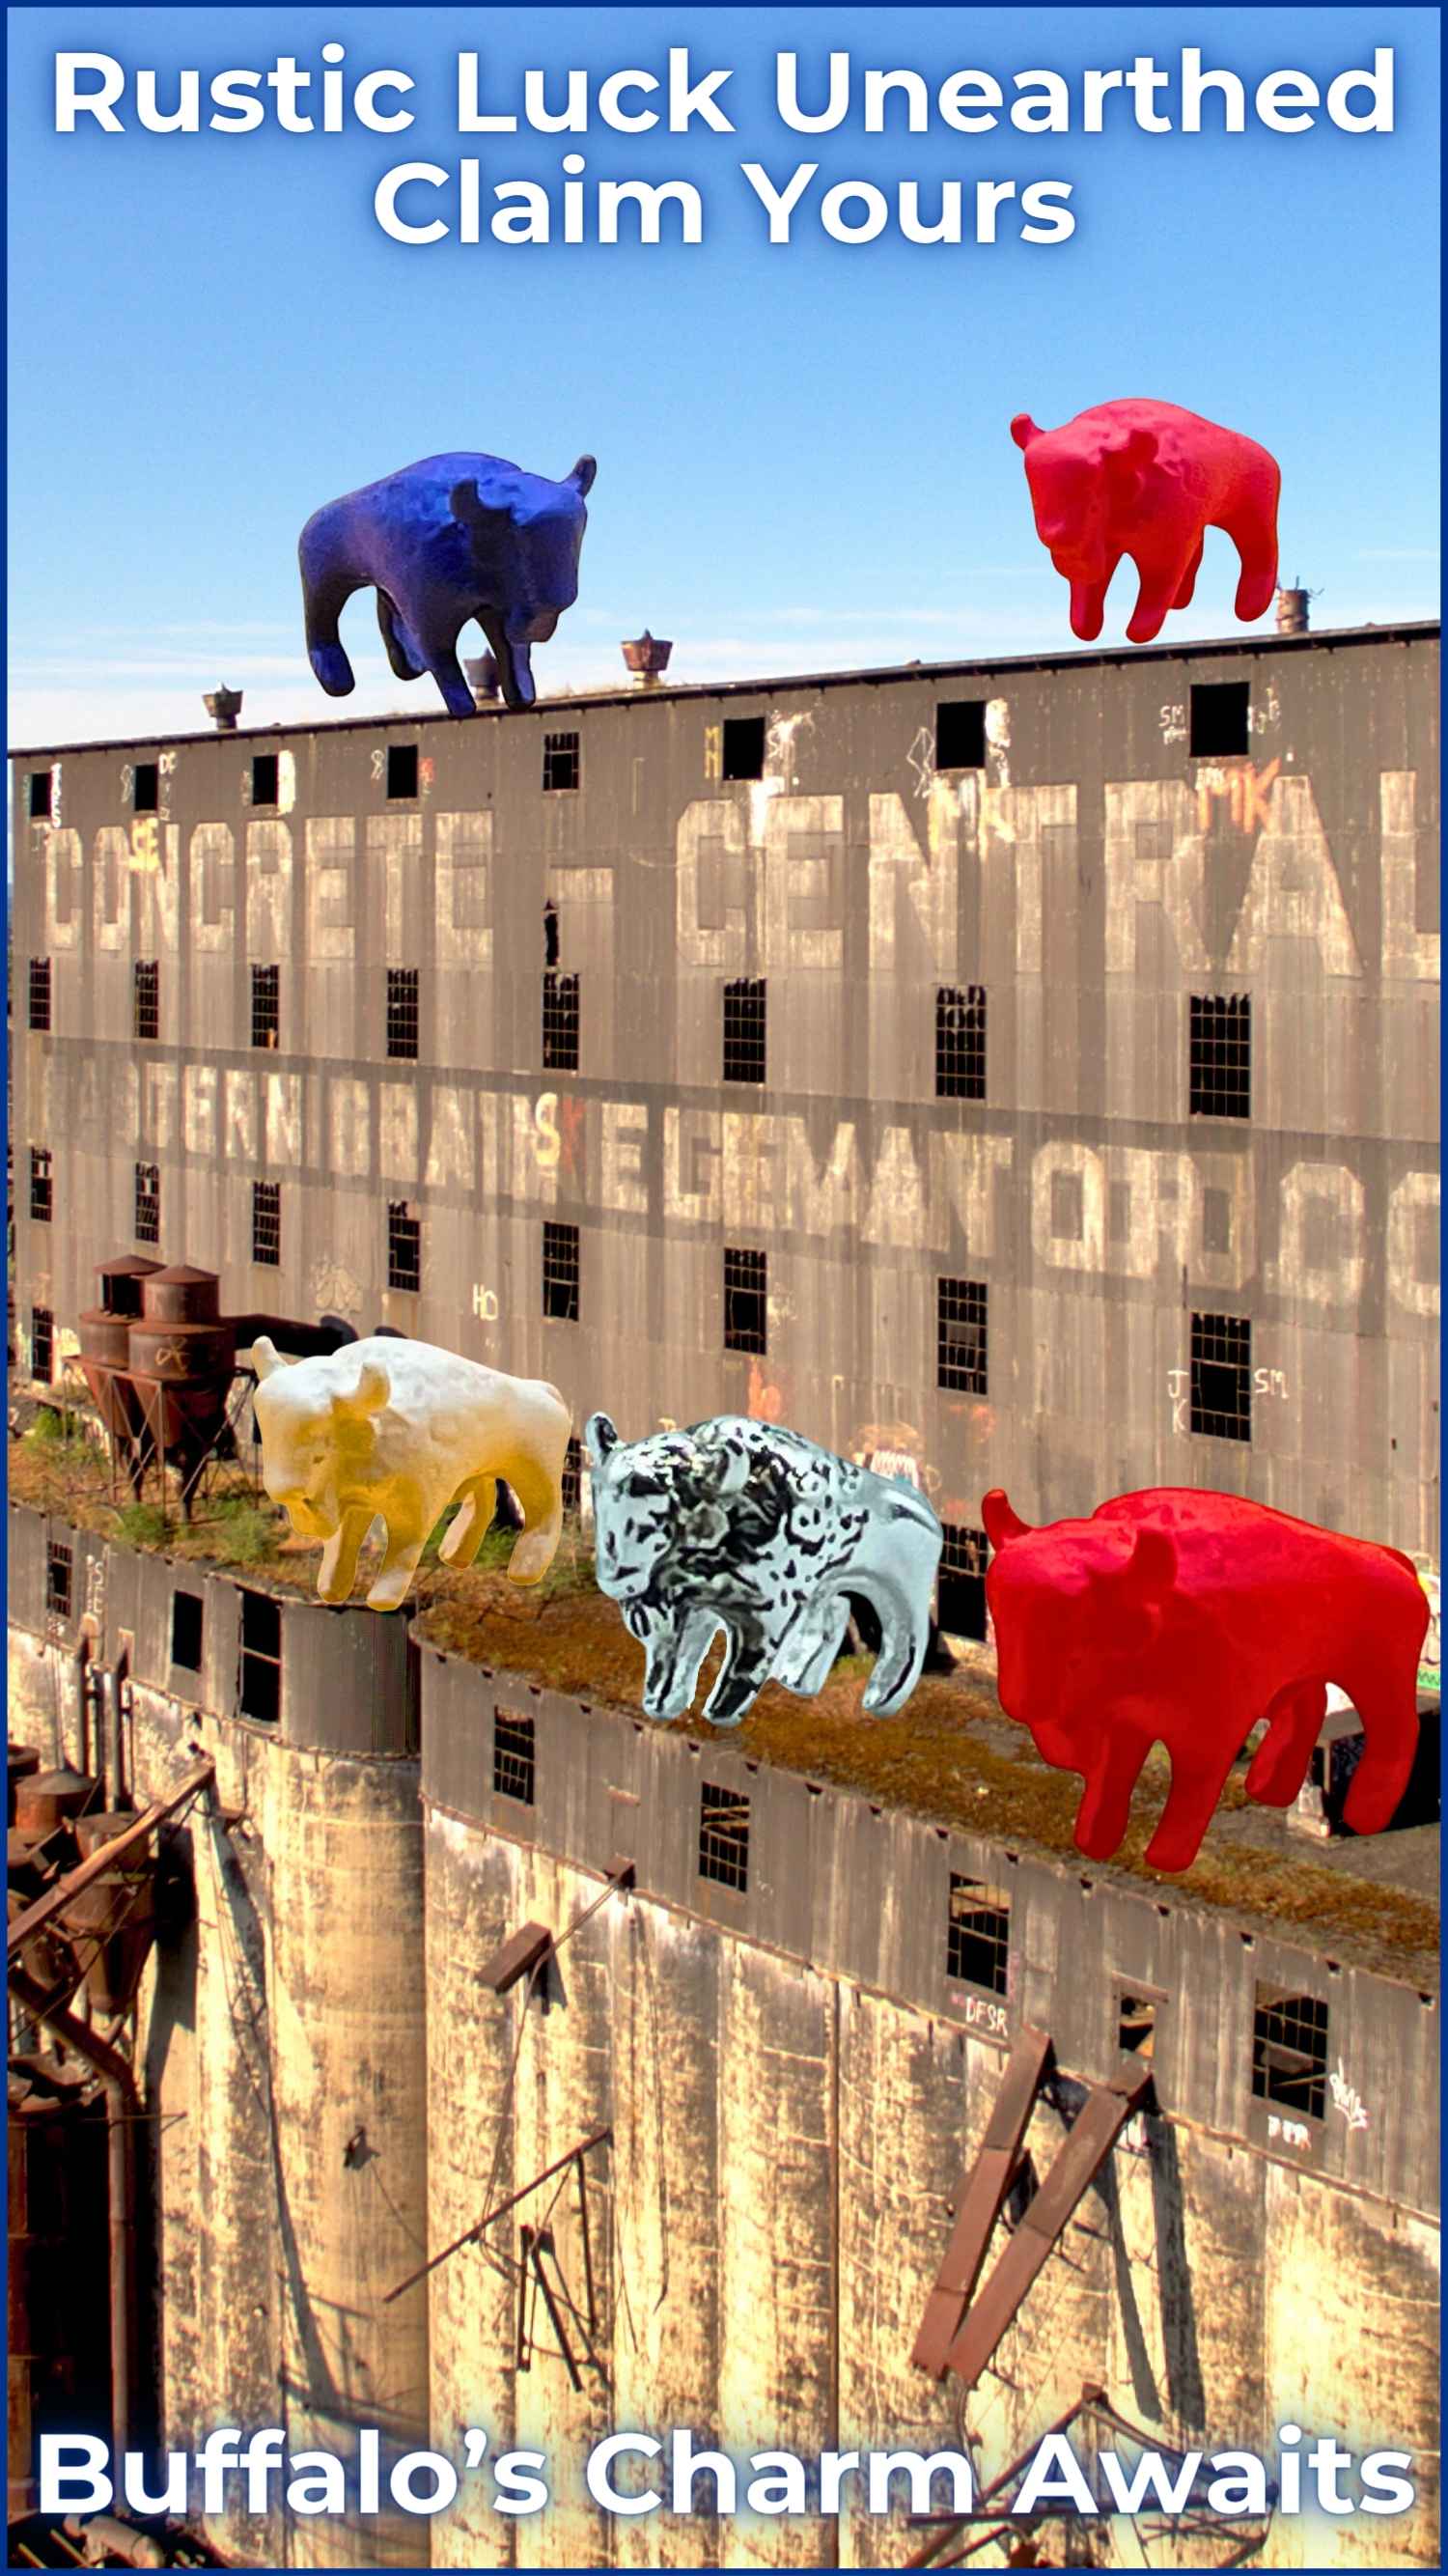 Assorted Lucky Buffalo figurines atop an urban backdrop, embodying 'Rustic Luck Unearthed.' Collectible charms that capture the enduring spirit and heritage of Buffalo, perfect for Bills enthusiasts on the move.